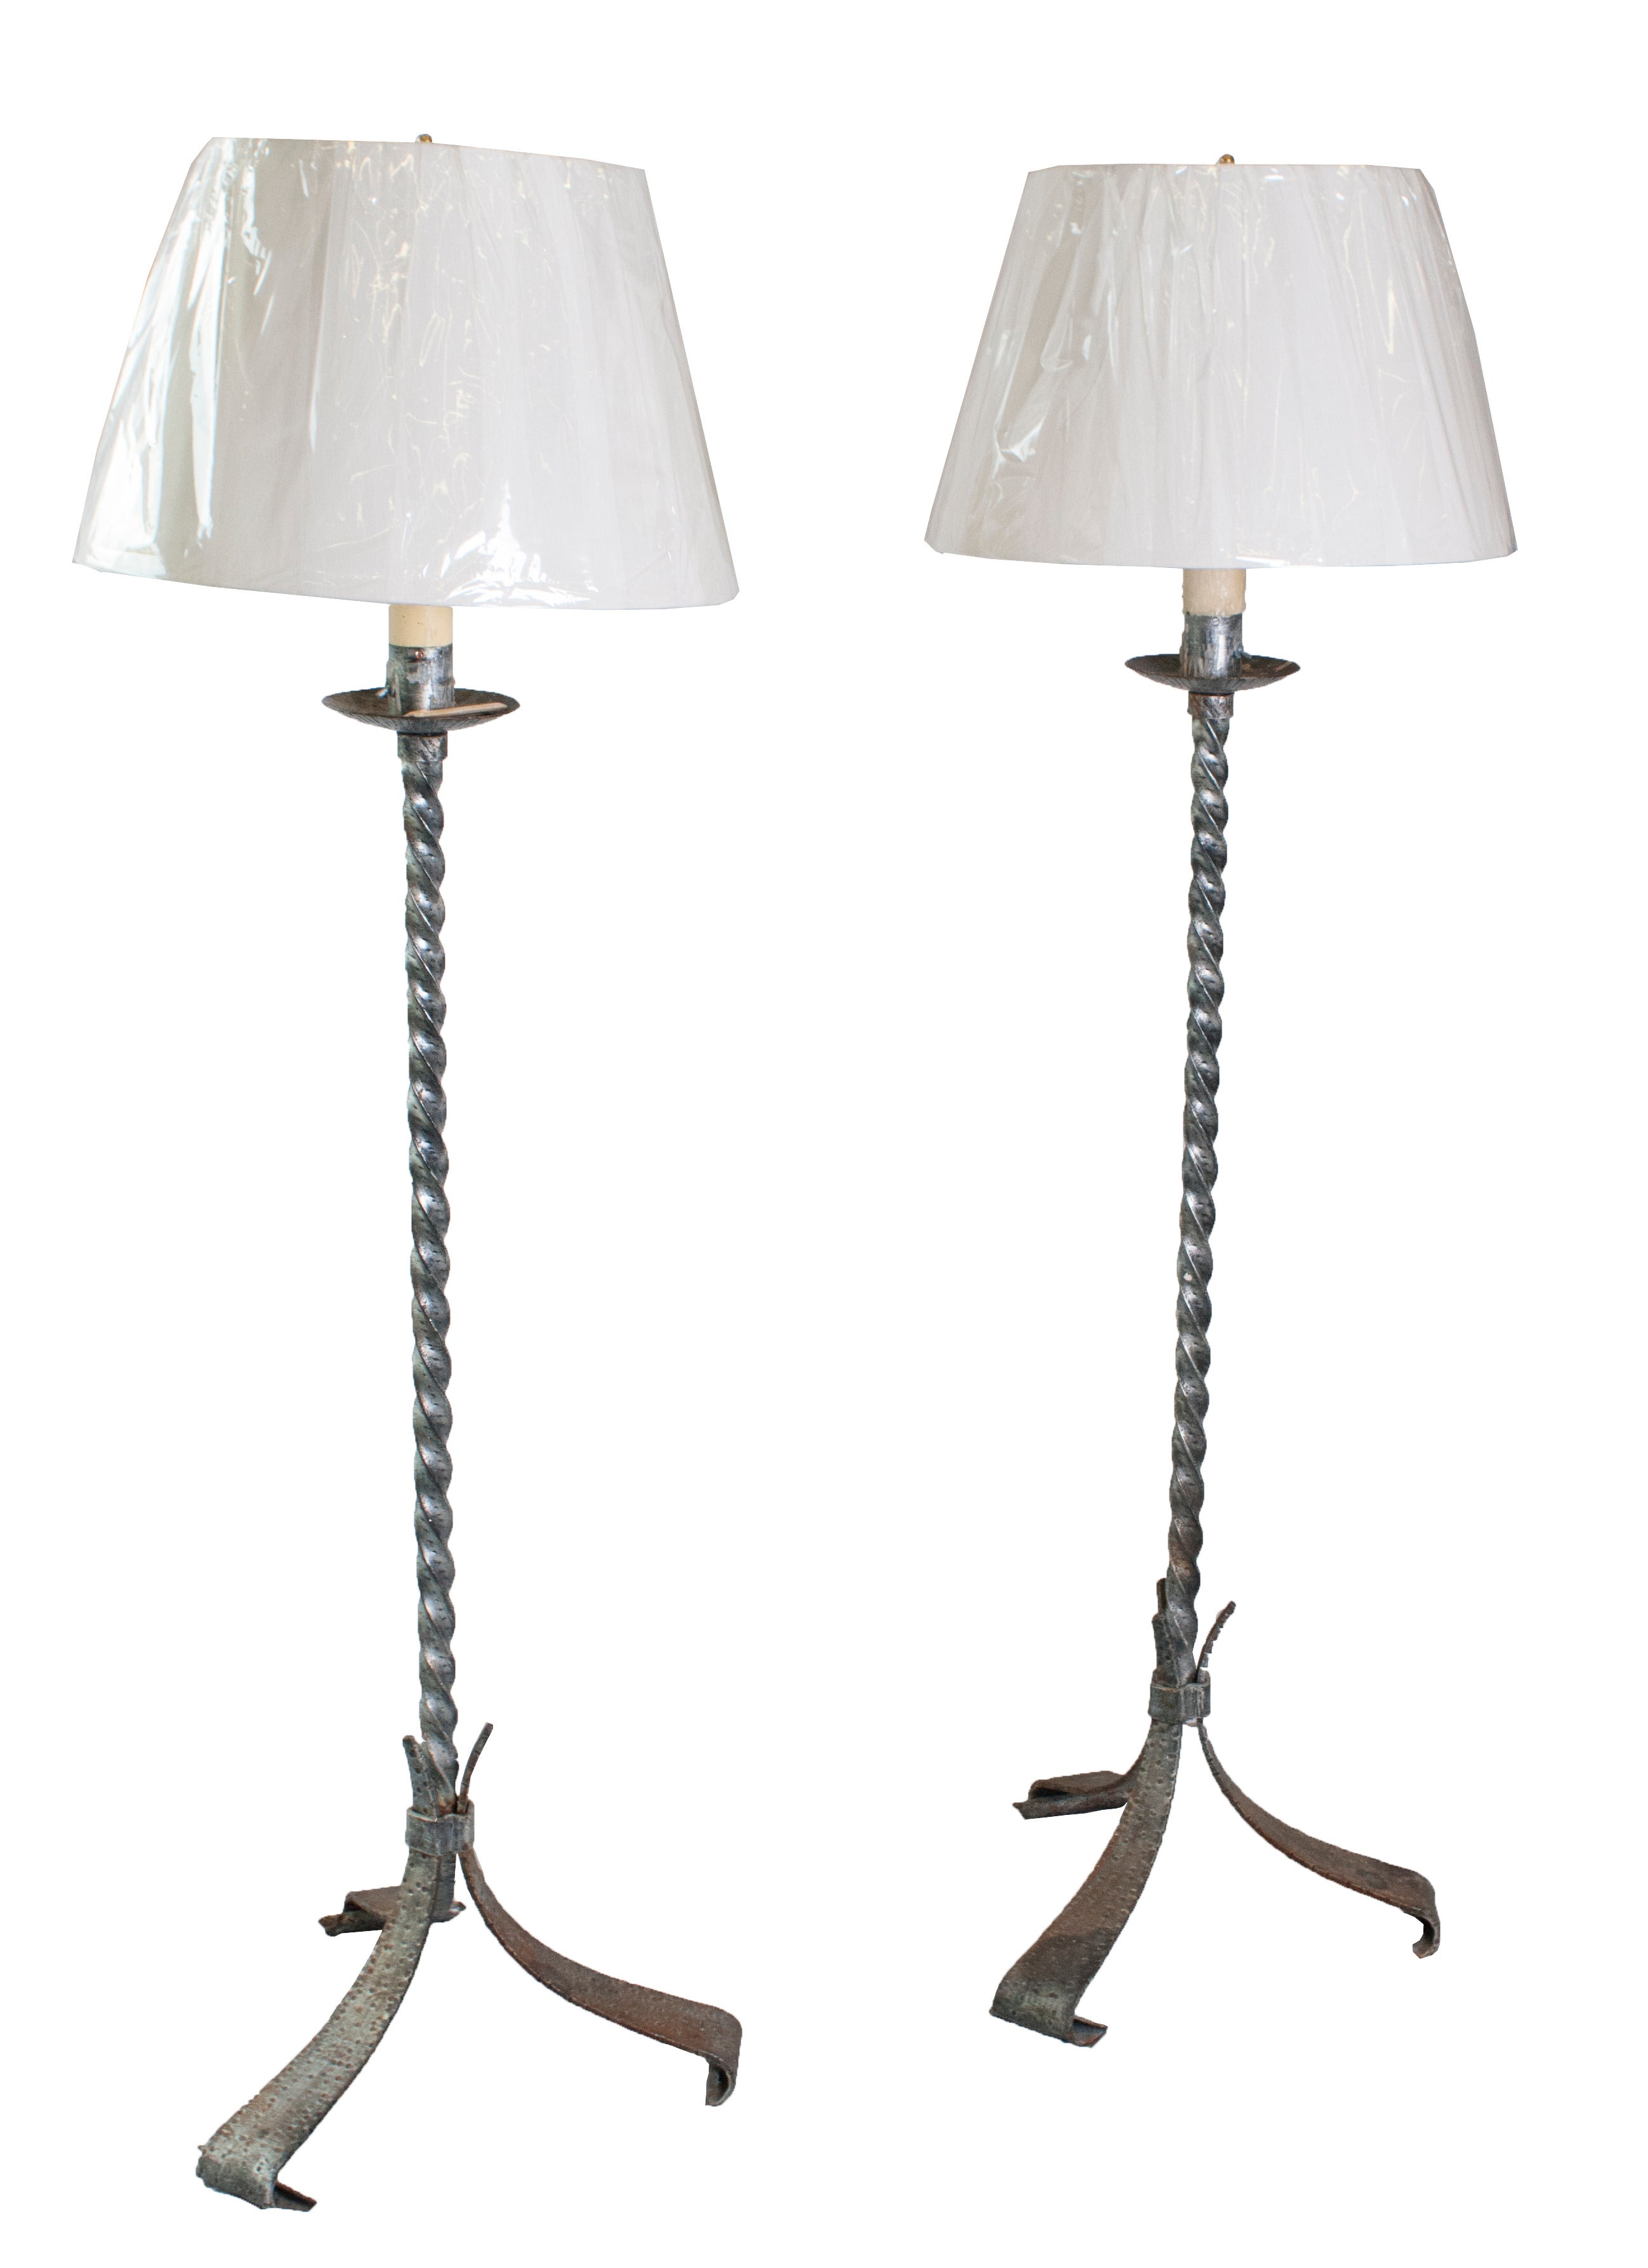 Pair of Silver Plated Twisted Column Floor Lamp